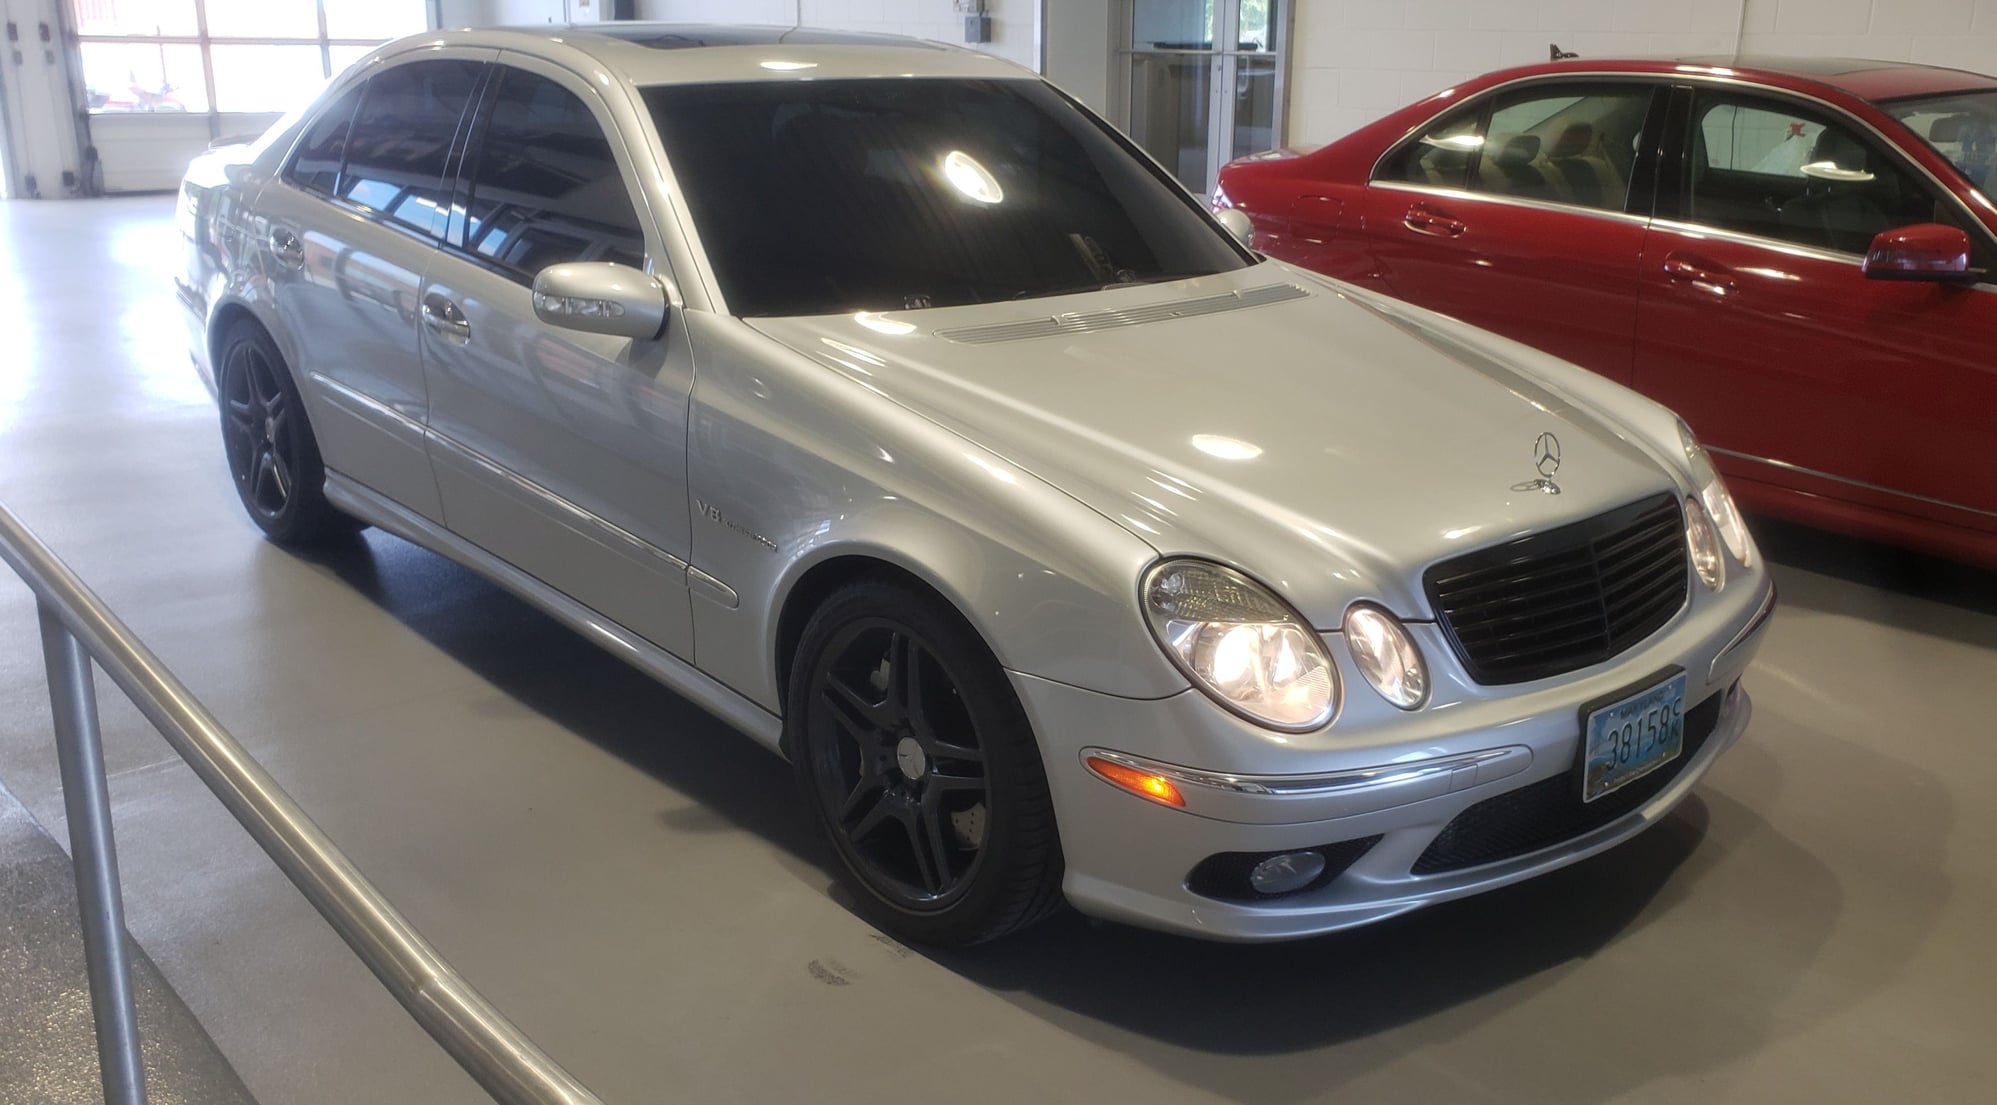 2006 Mercedes-Benz E55 AMG - 2006 E55 Iridium Silver, Immaculate. - Used - VIN WDBUF76J66A824546 - 107,500 Miles - 8 cyl - 2WD - Automatic - Sedan - Silver - Columbia, MD 21046, United States